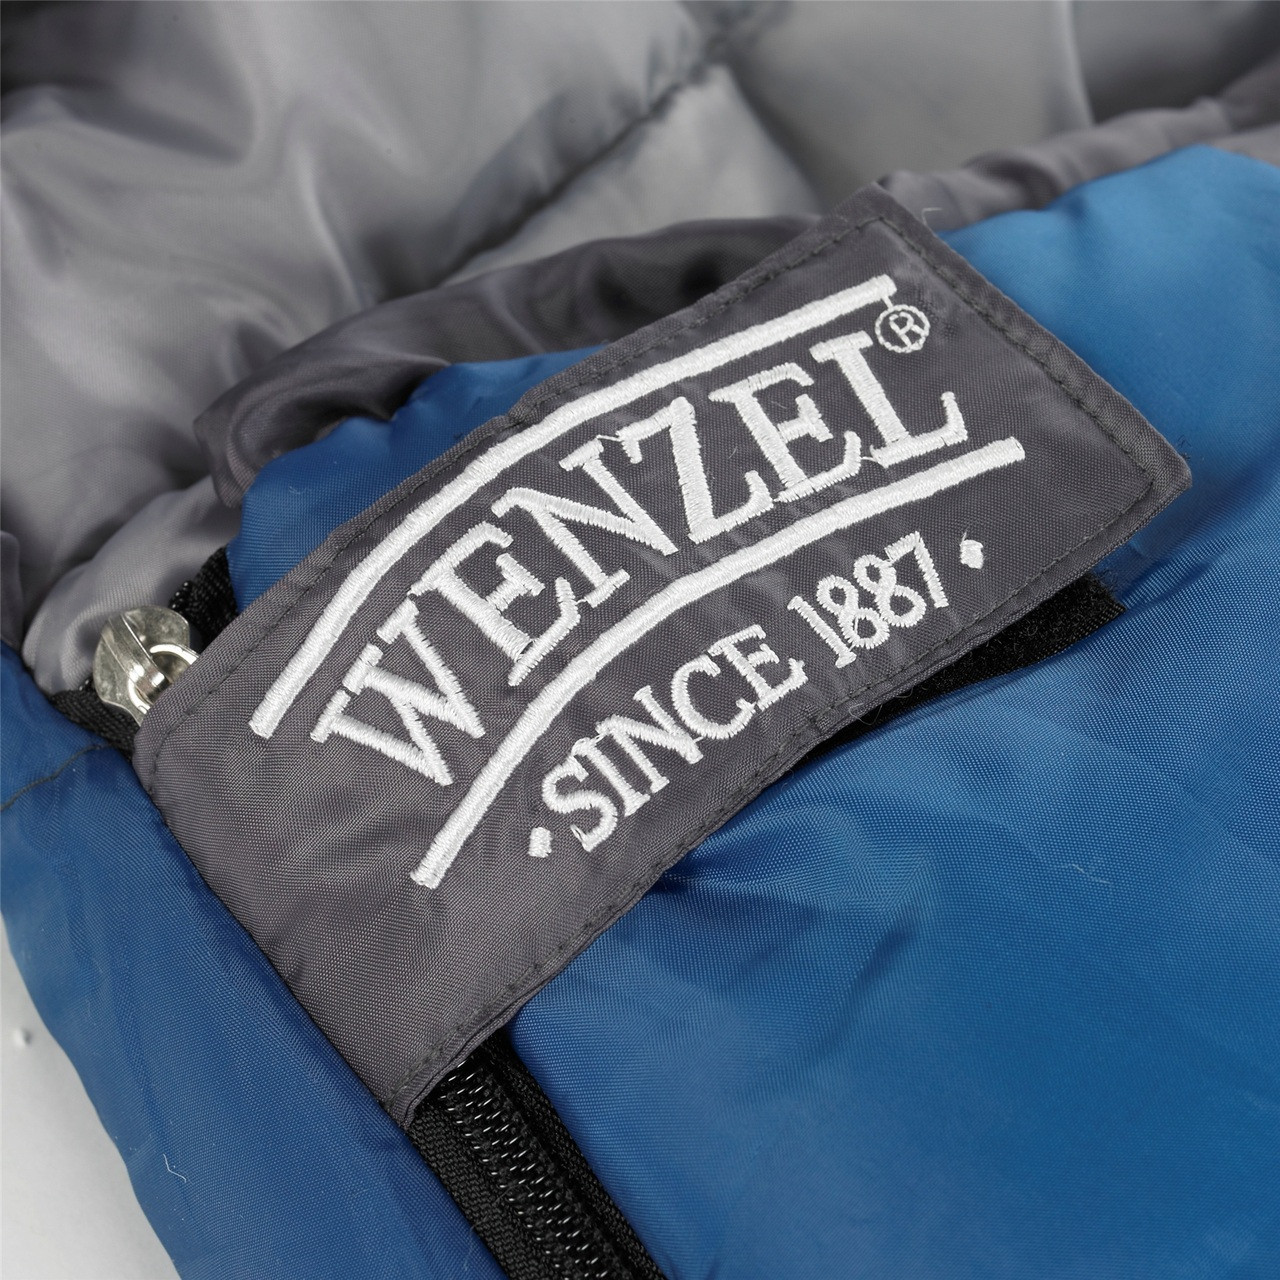 Close up view of the Velcro zipper latch over the zipped showing 'Wenzel since 1887' text